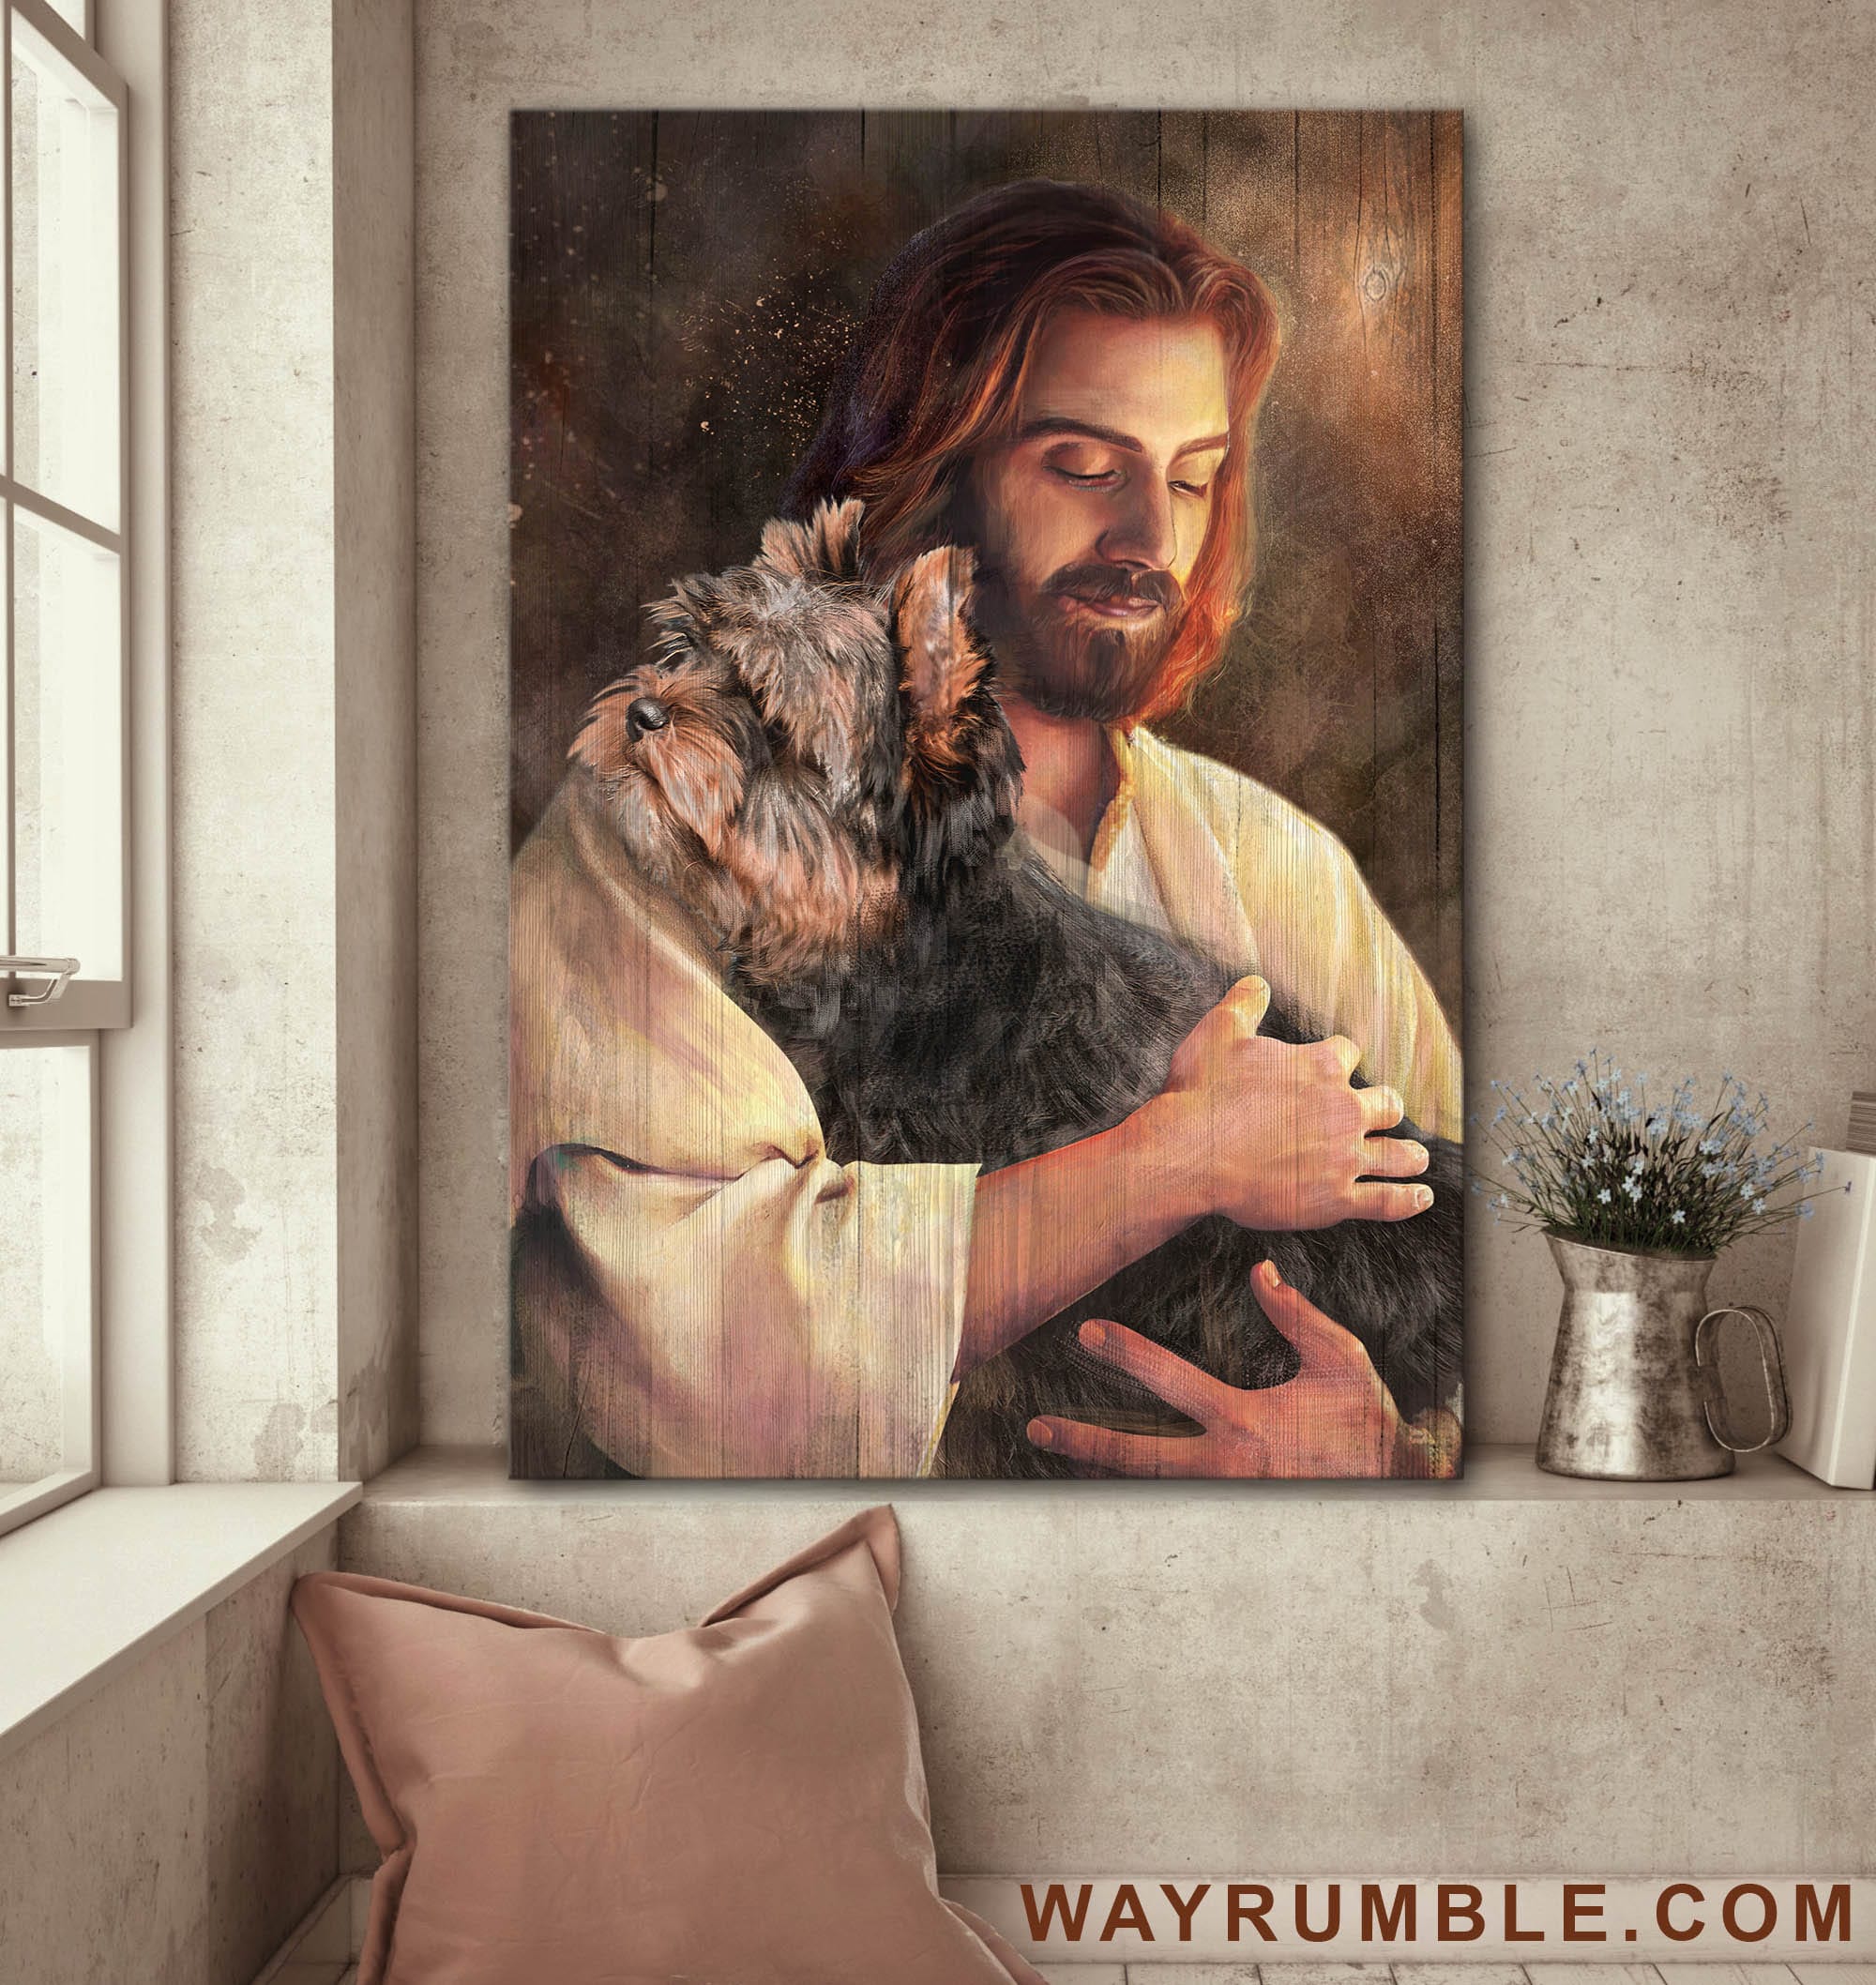 Yorkshire Terrier, In his arms, Jesus painting - Jesus Portrait Canvas Prints, Wall Art